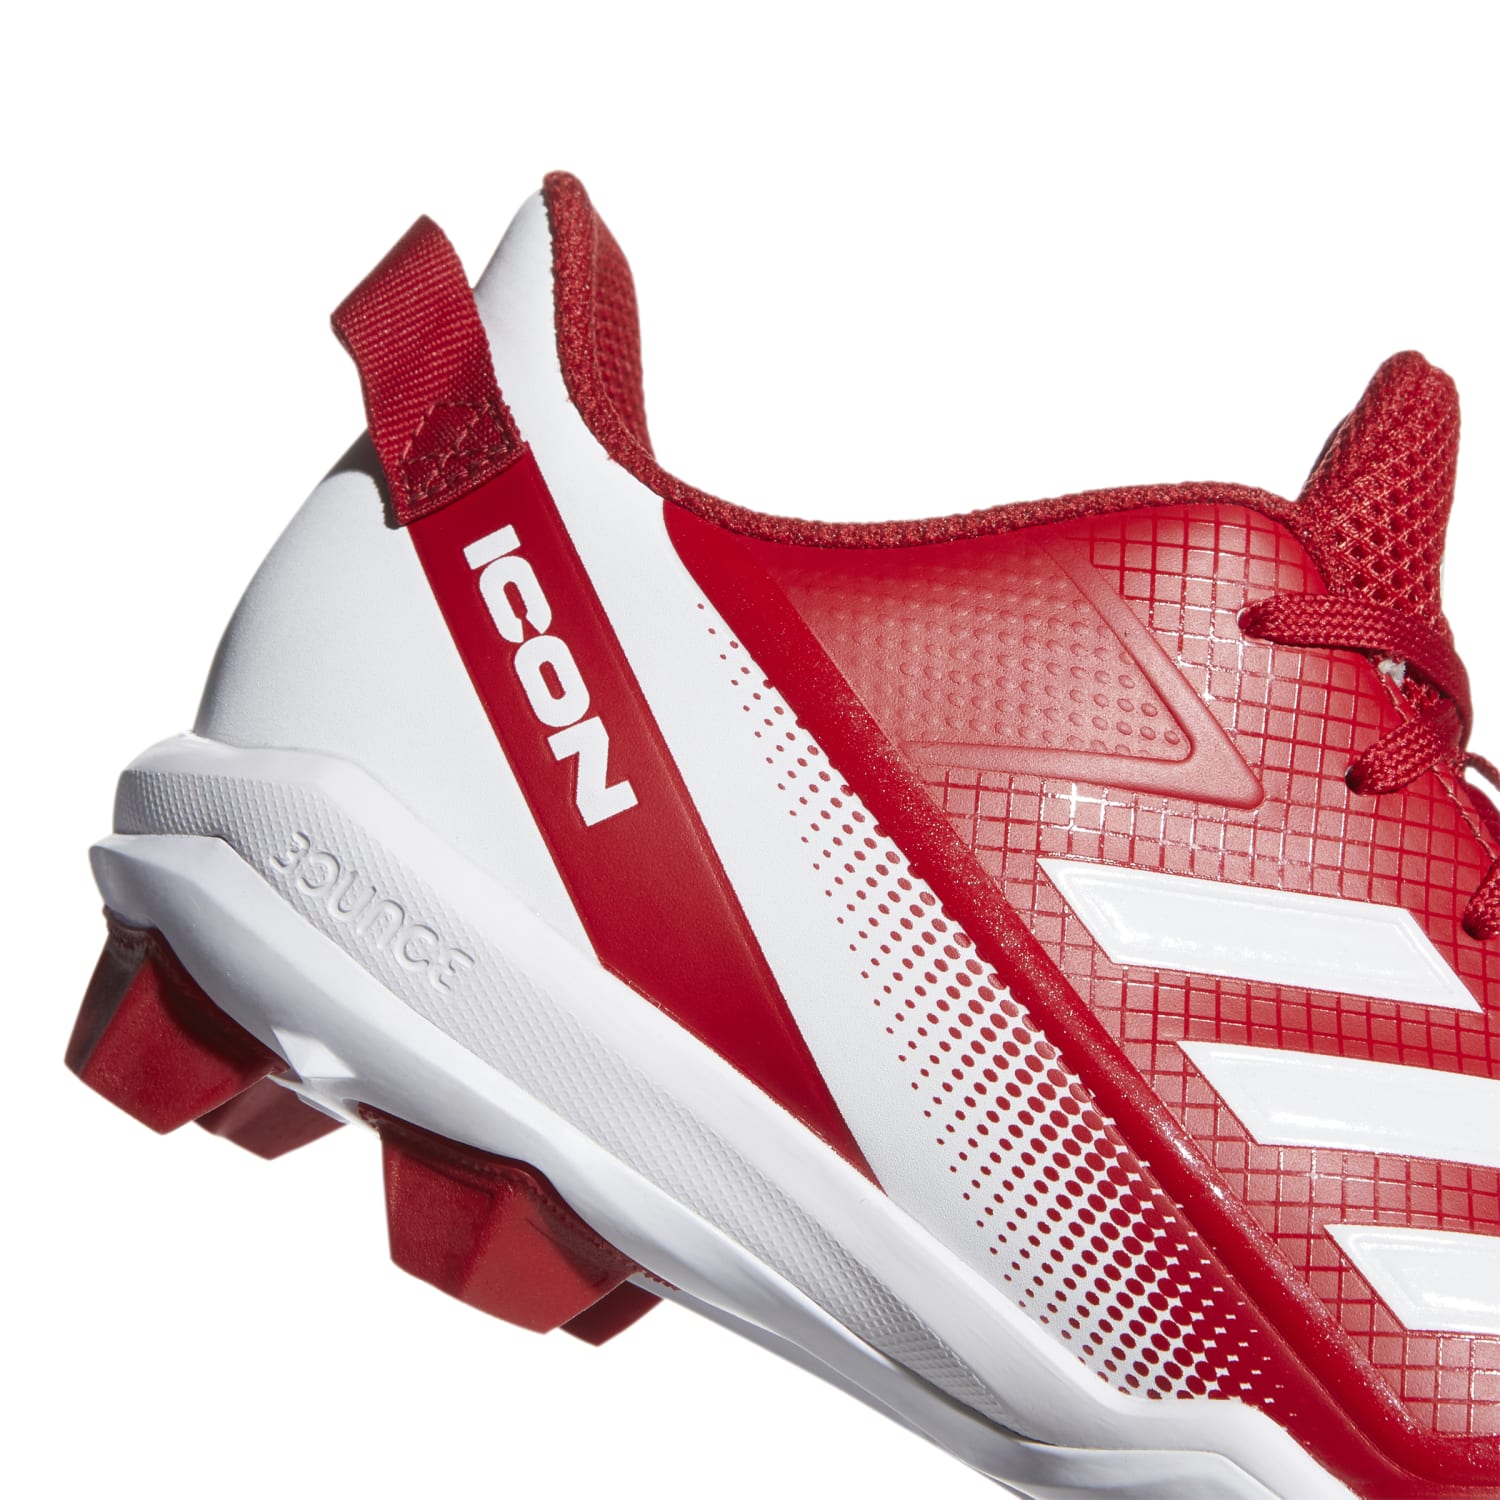 Adidas Icon 7 Bounce Molded Youth Rubber Cleats